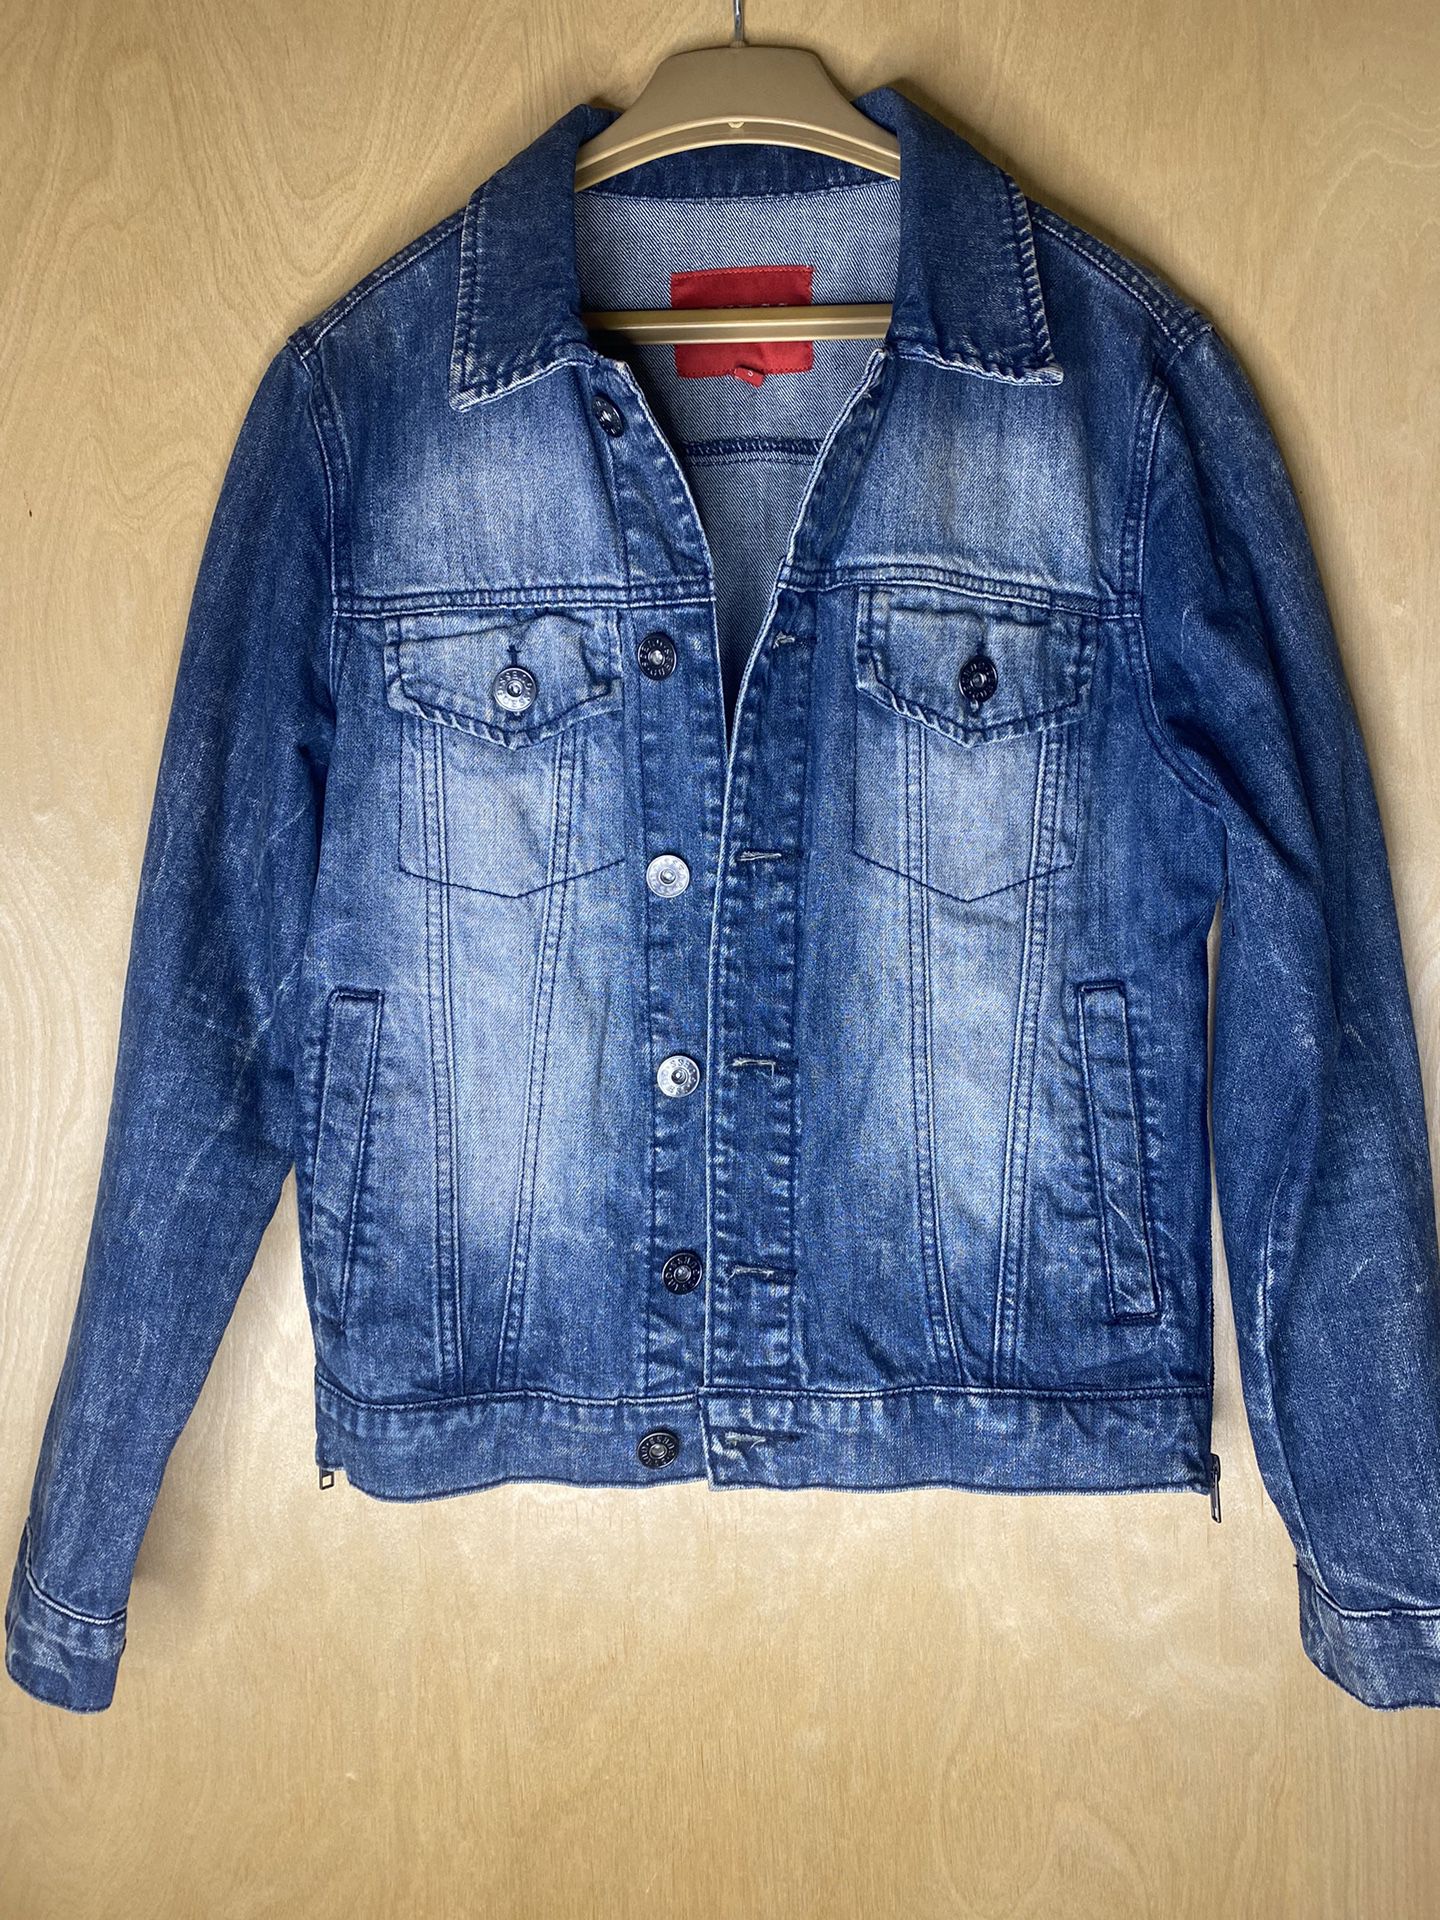 Guess Denim Jacket With Zipper Accents